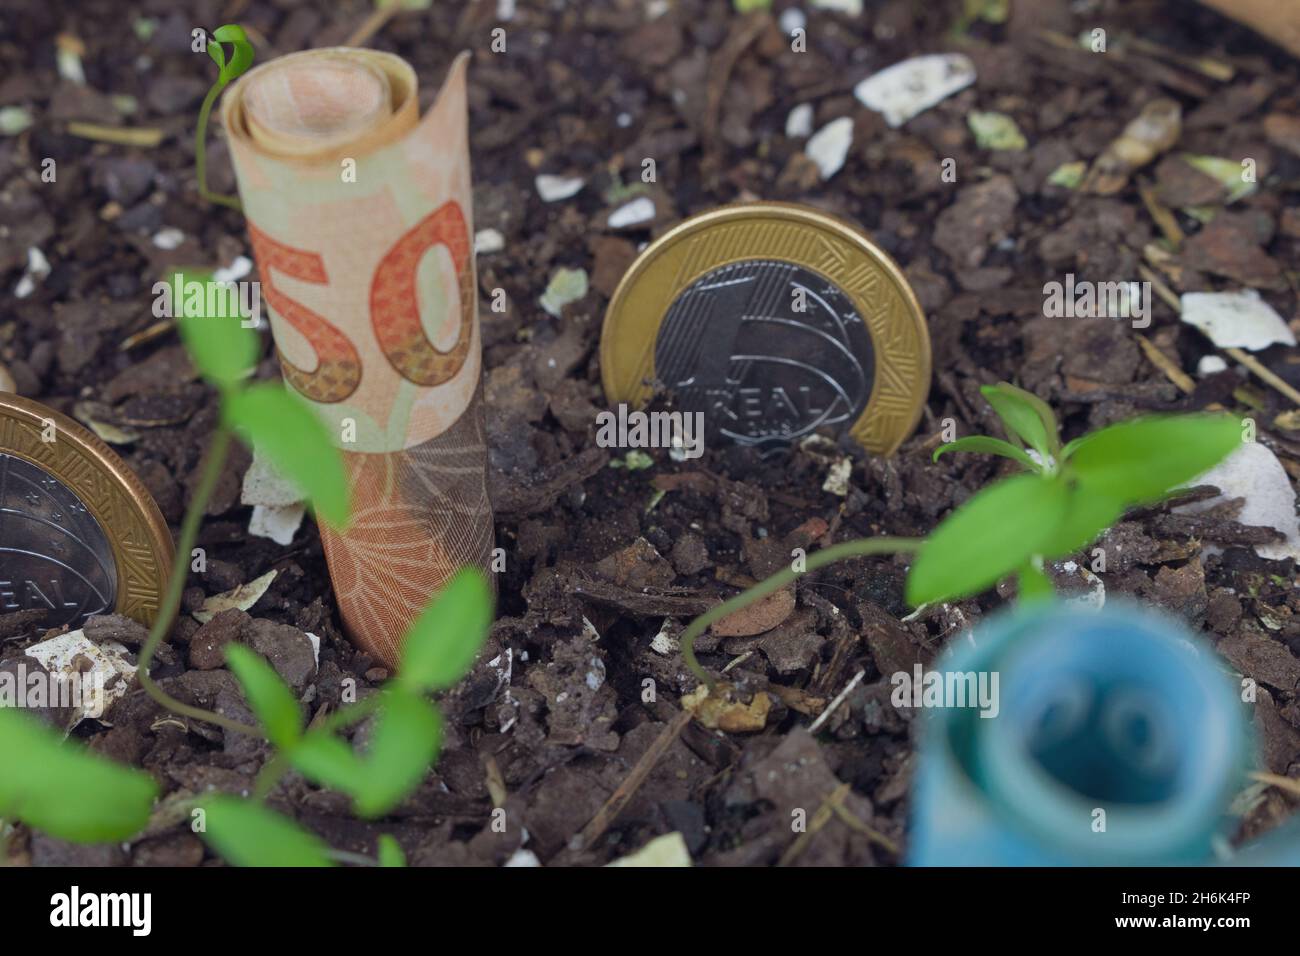 Brazilian money buried in a vase with seedlings. Stock Photo